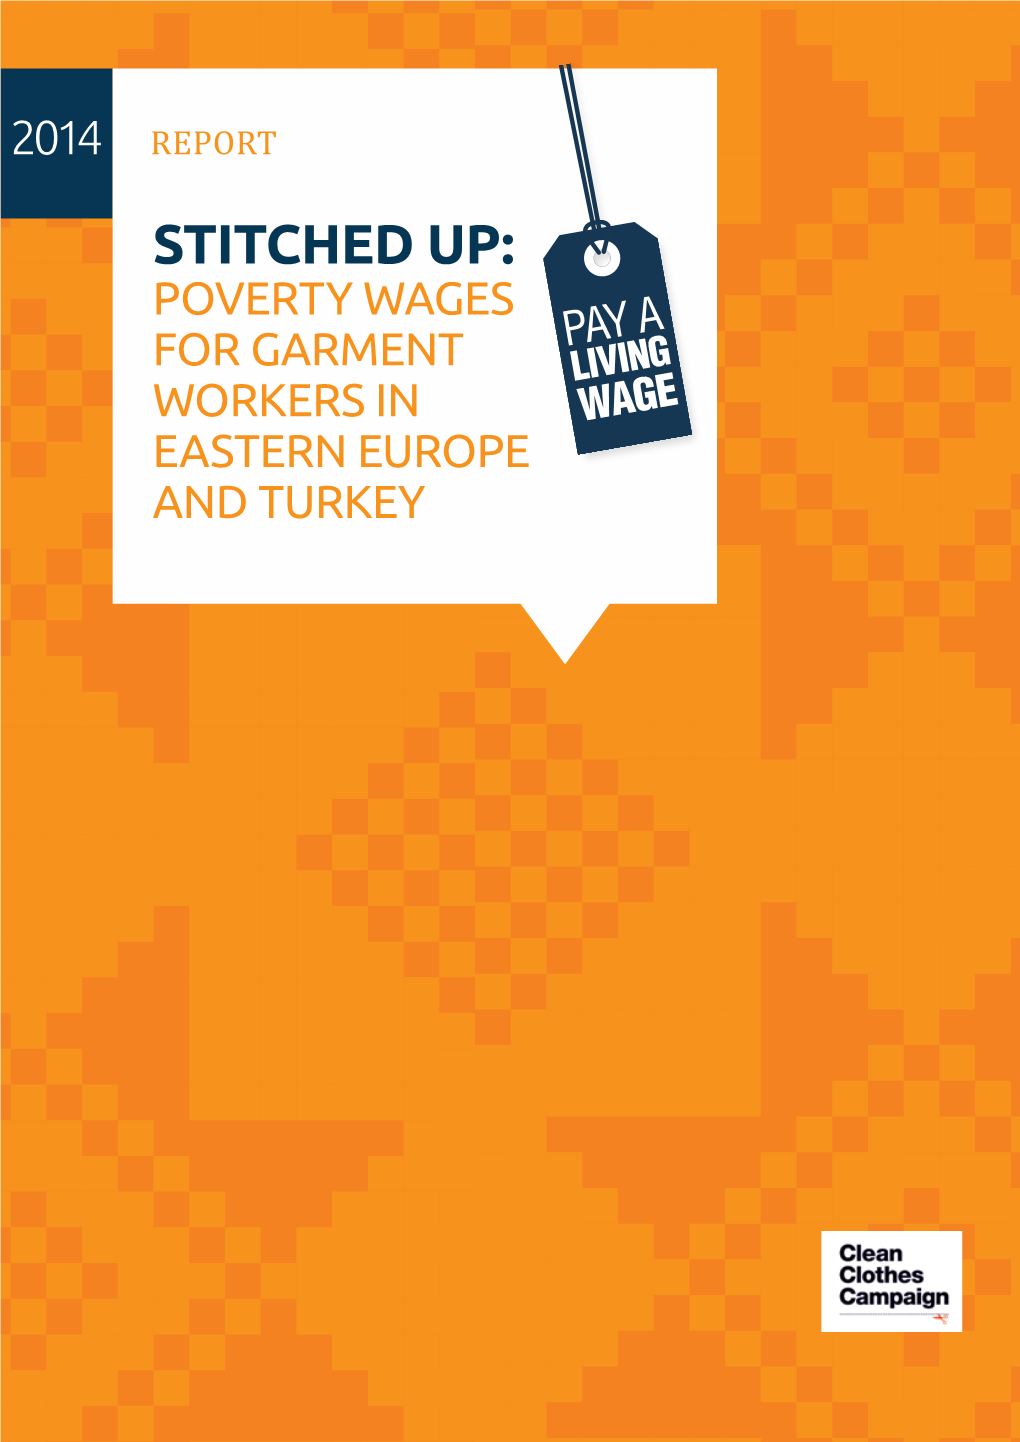 Stitched Up: Poverty Wages for Garment Workers in Eastern Europe and Turkey Contents